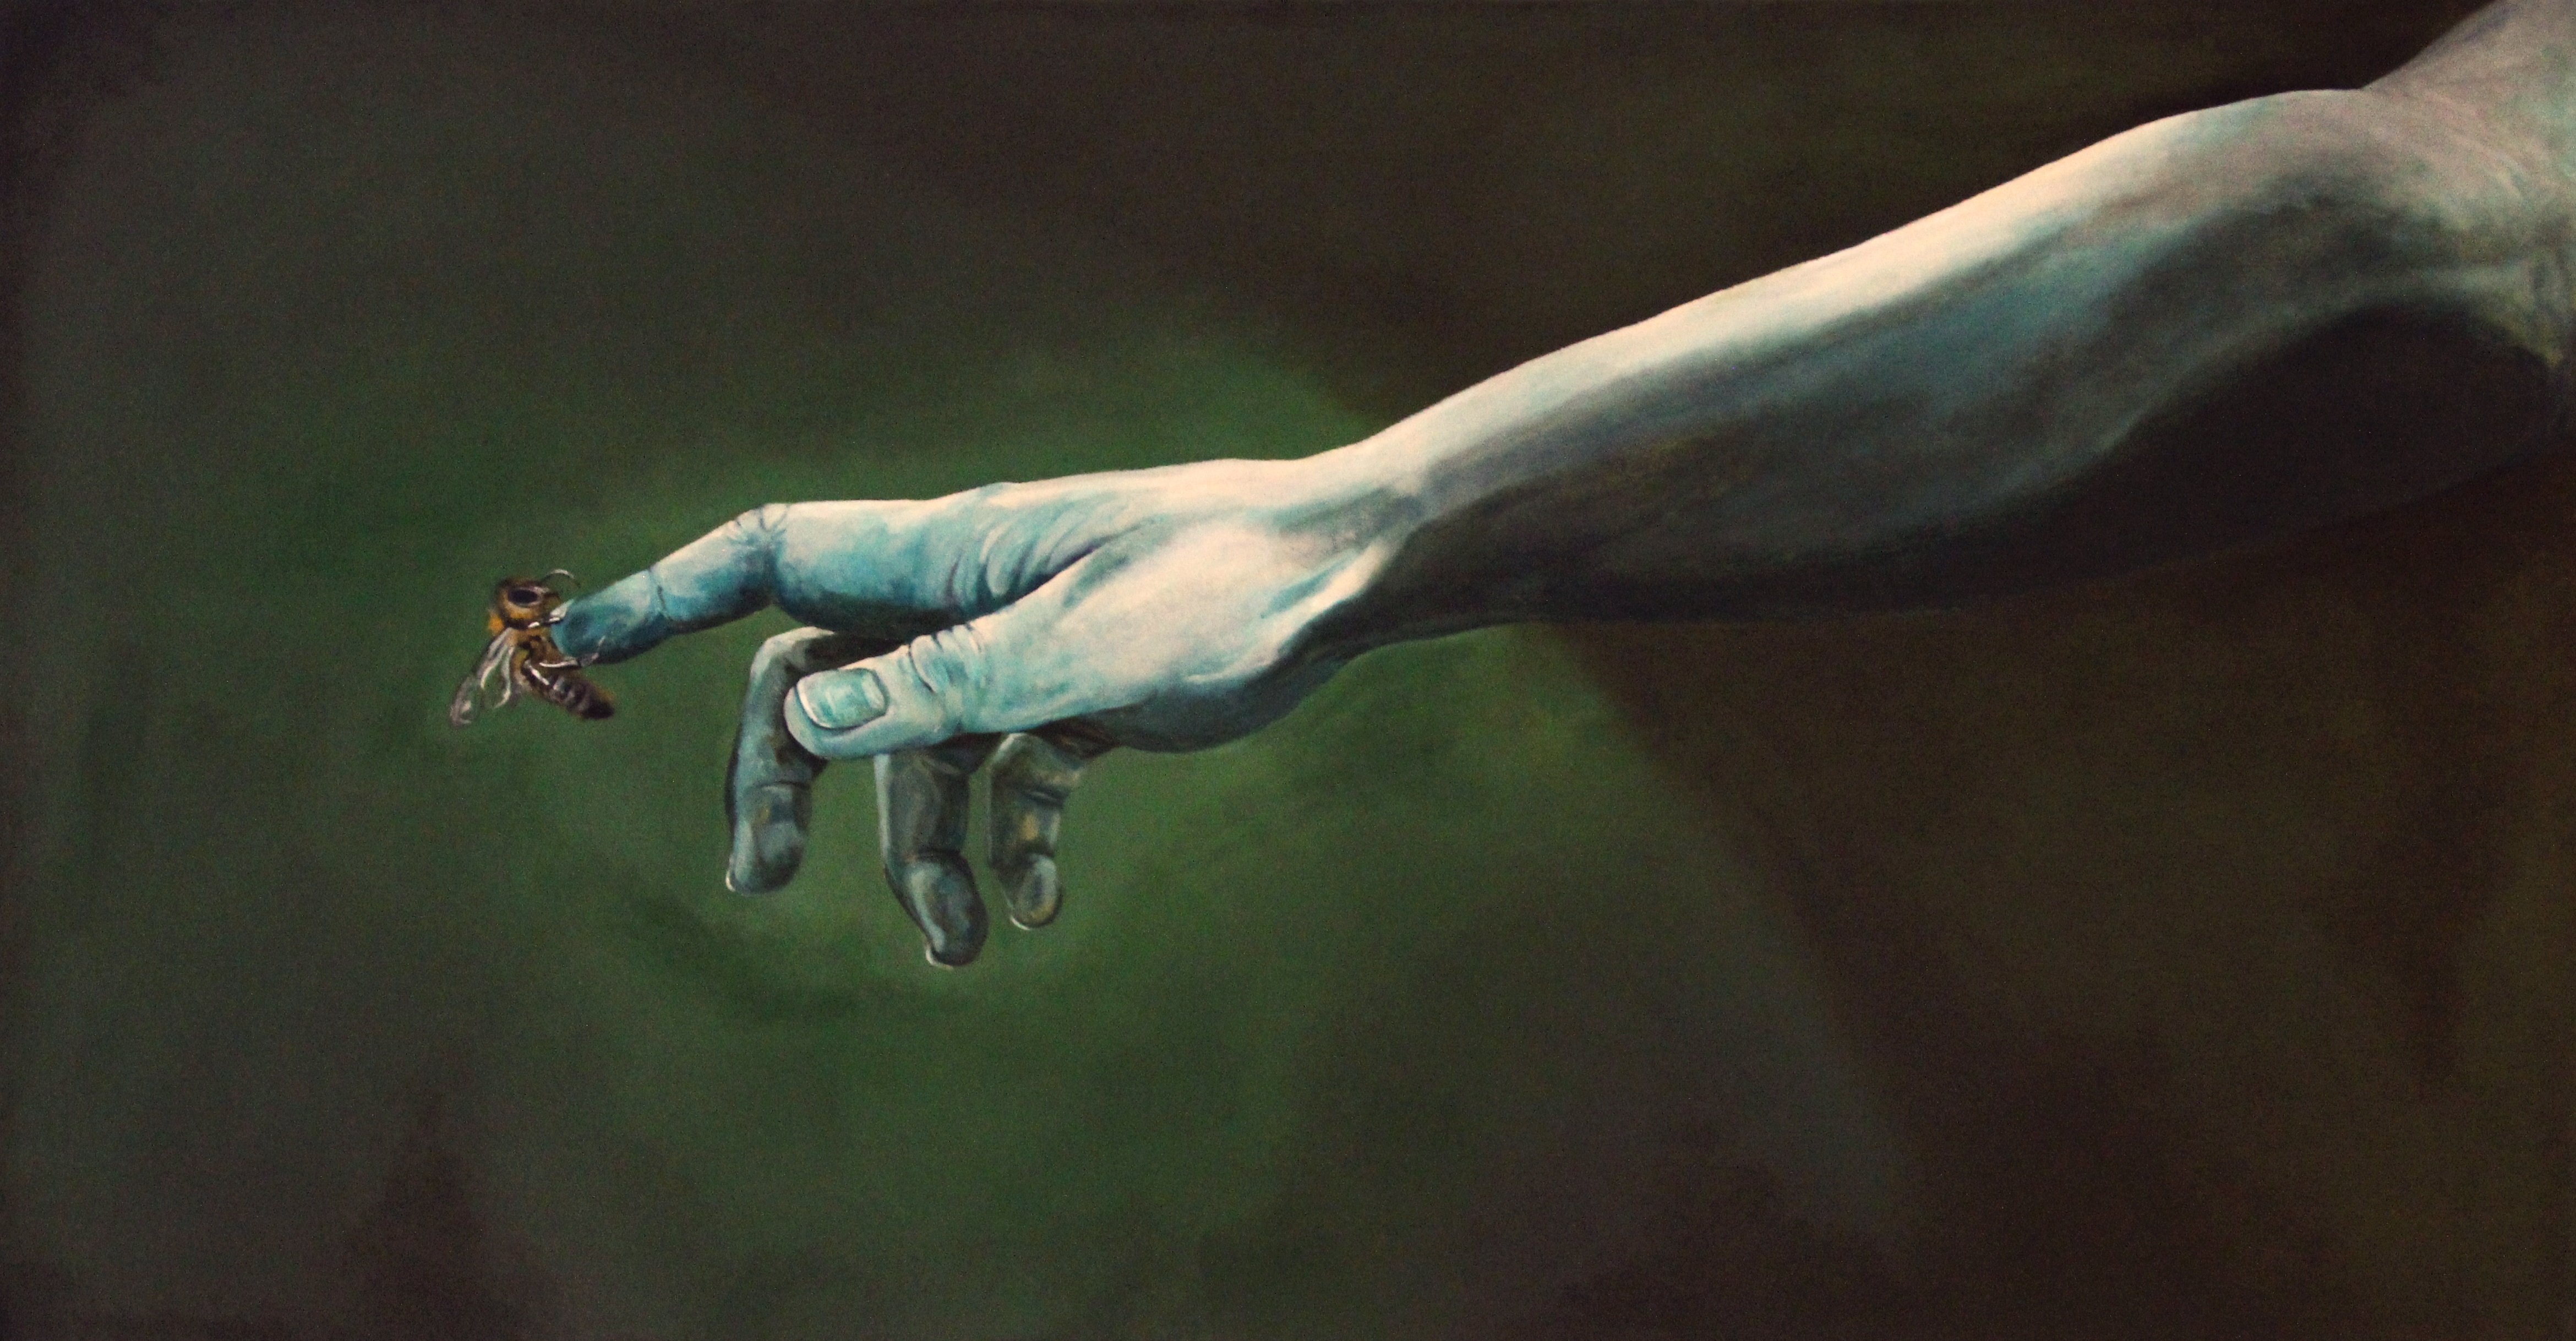 Painting of an outstretched hand with a bee on the person's finger